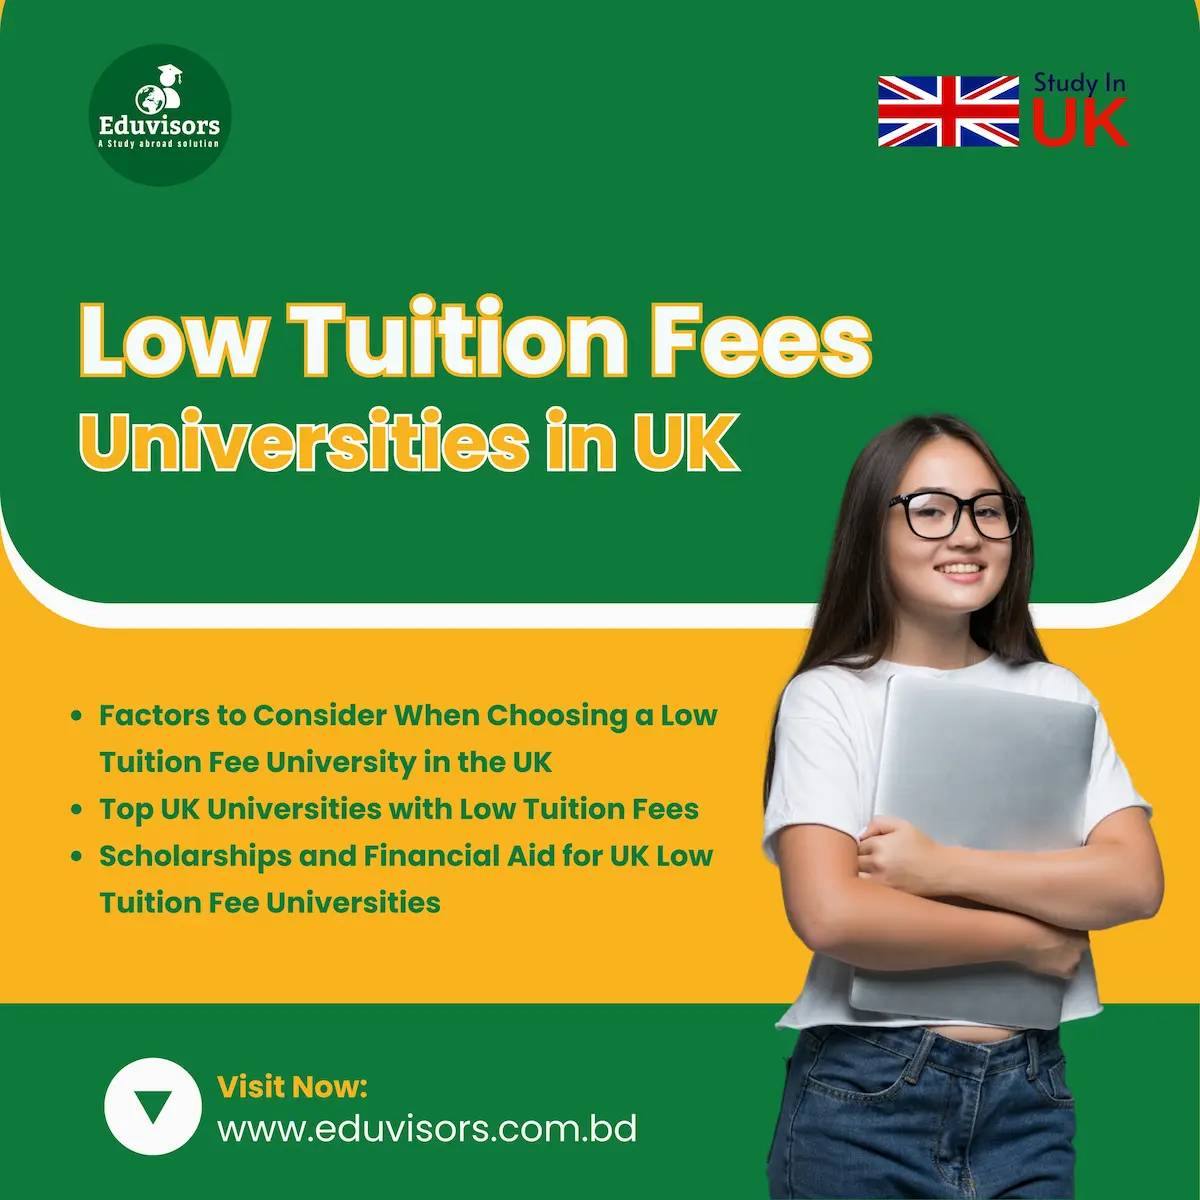 UK Low Tuition Fees Universities: Affordable Higher Education Options